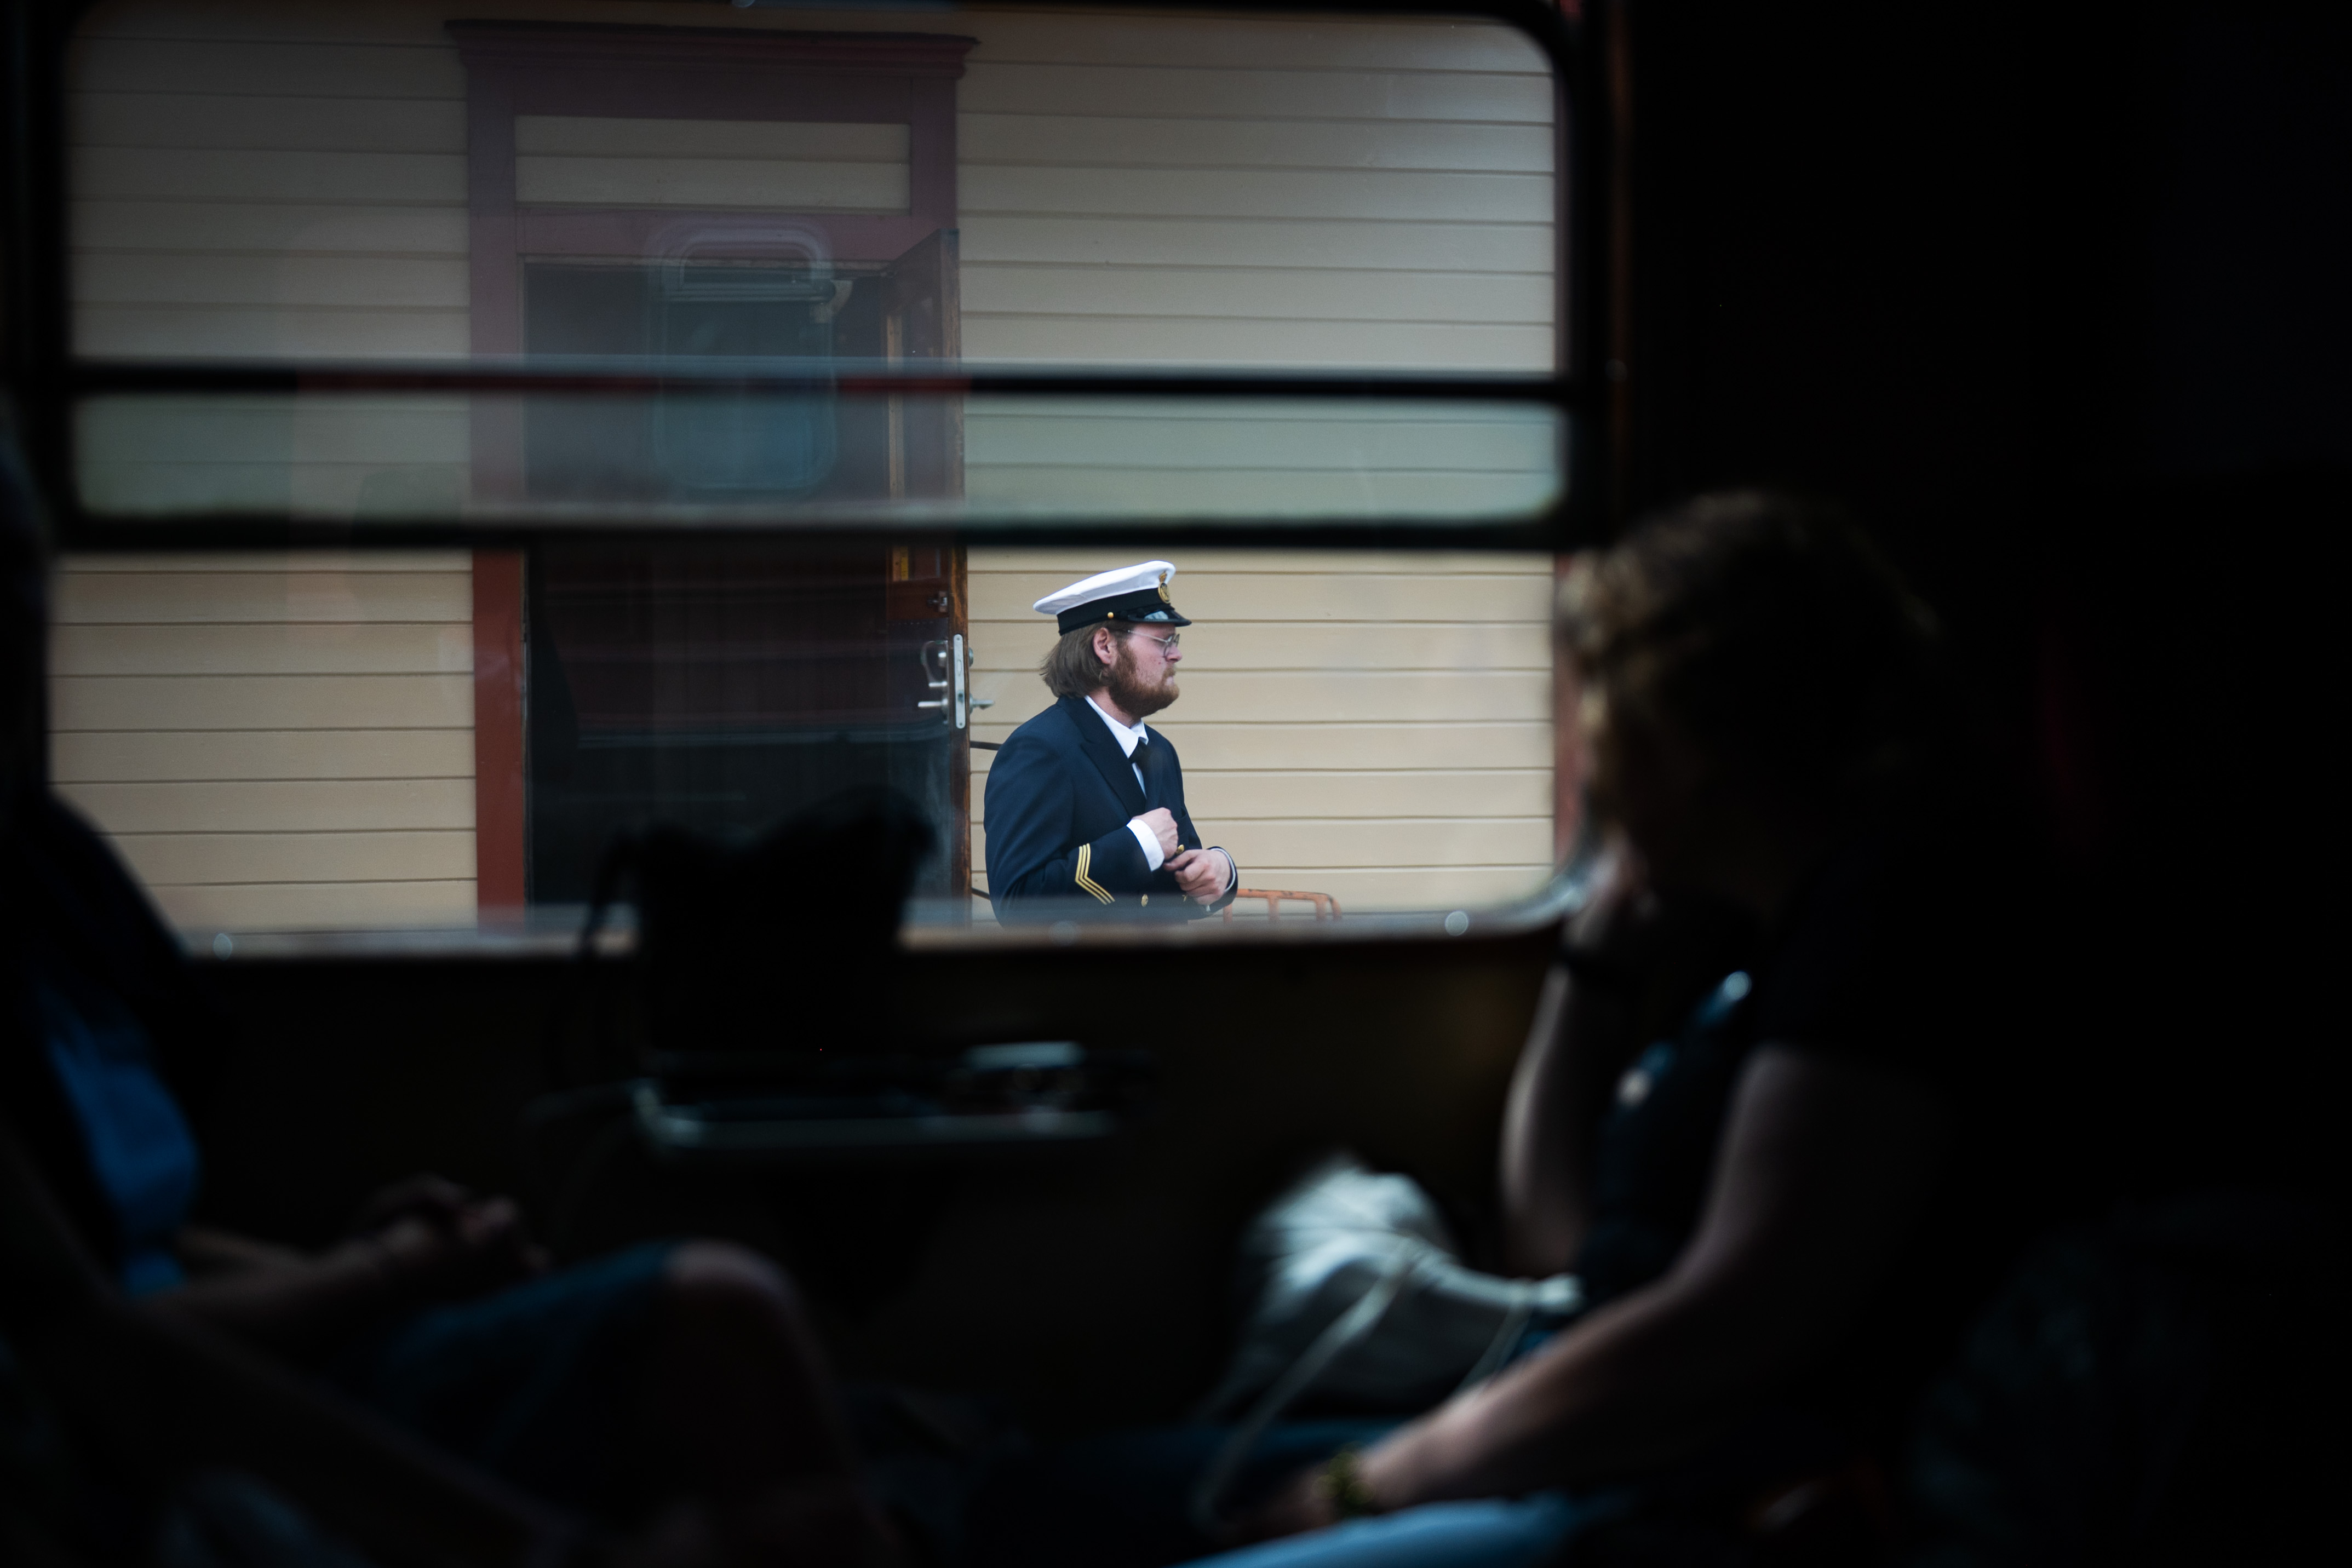 The picture is taken from inside a train car. Through the window you can see a man in uniform on the platform.